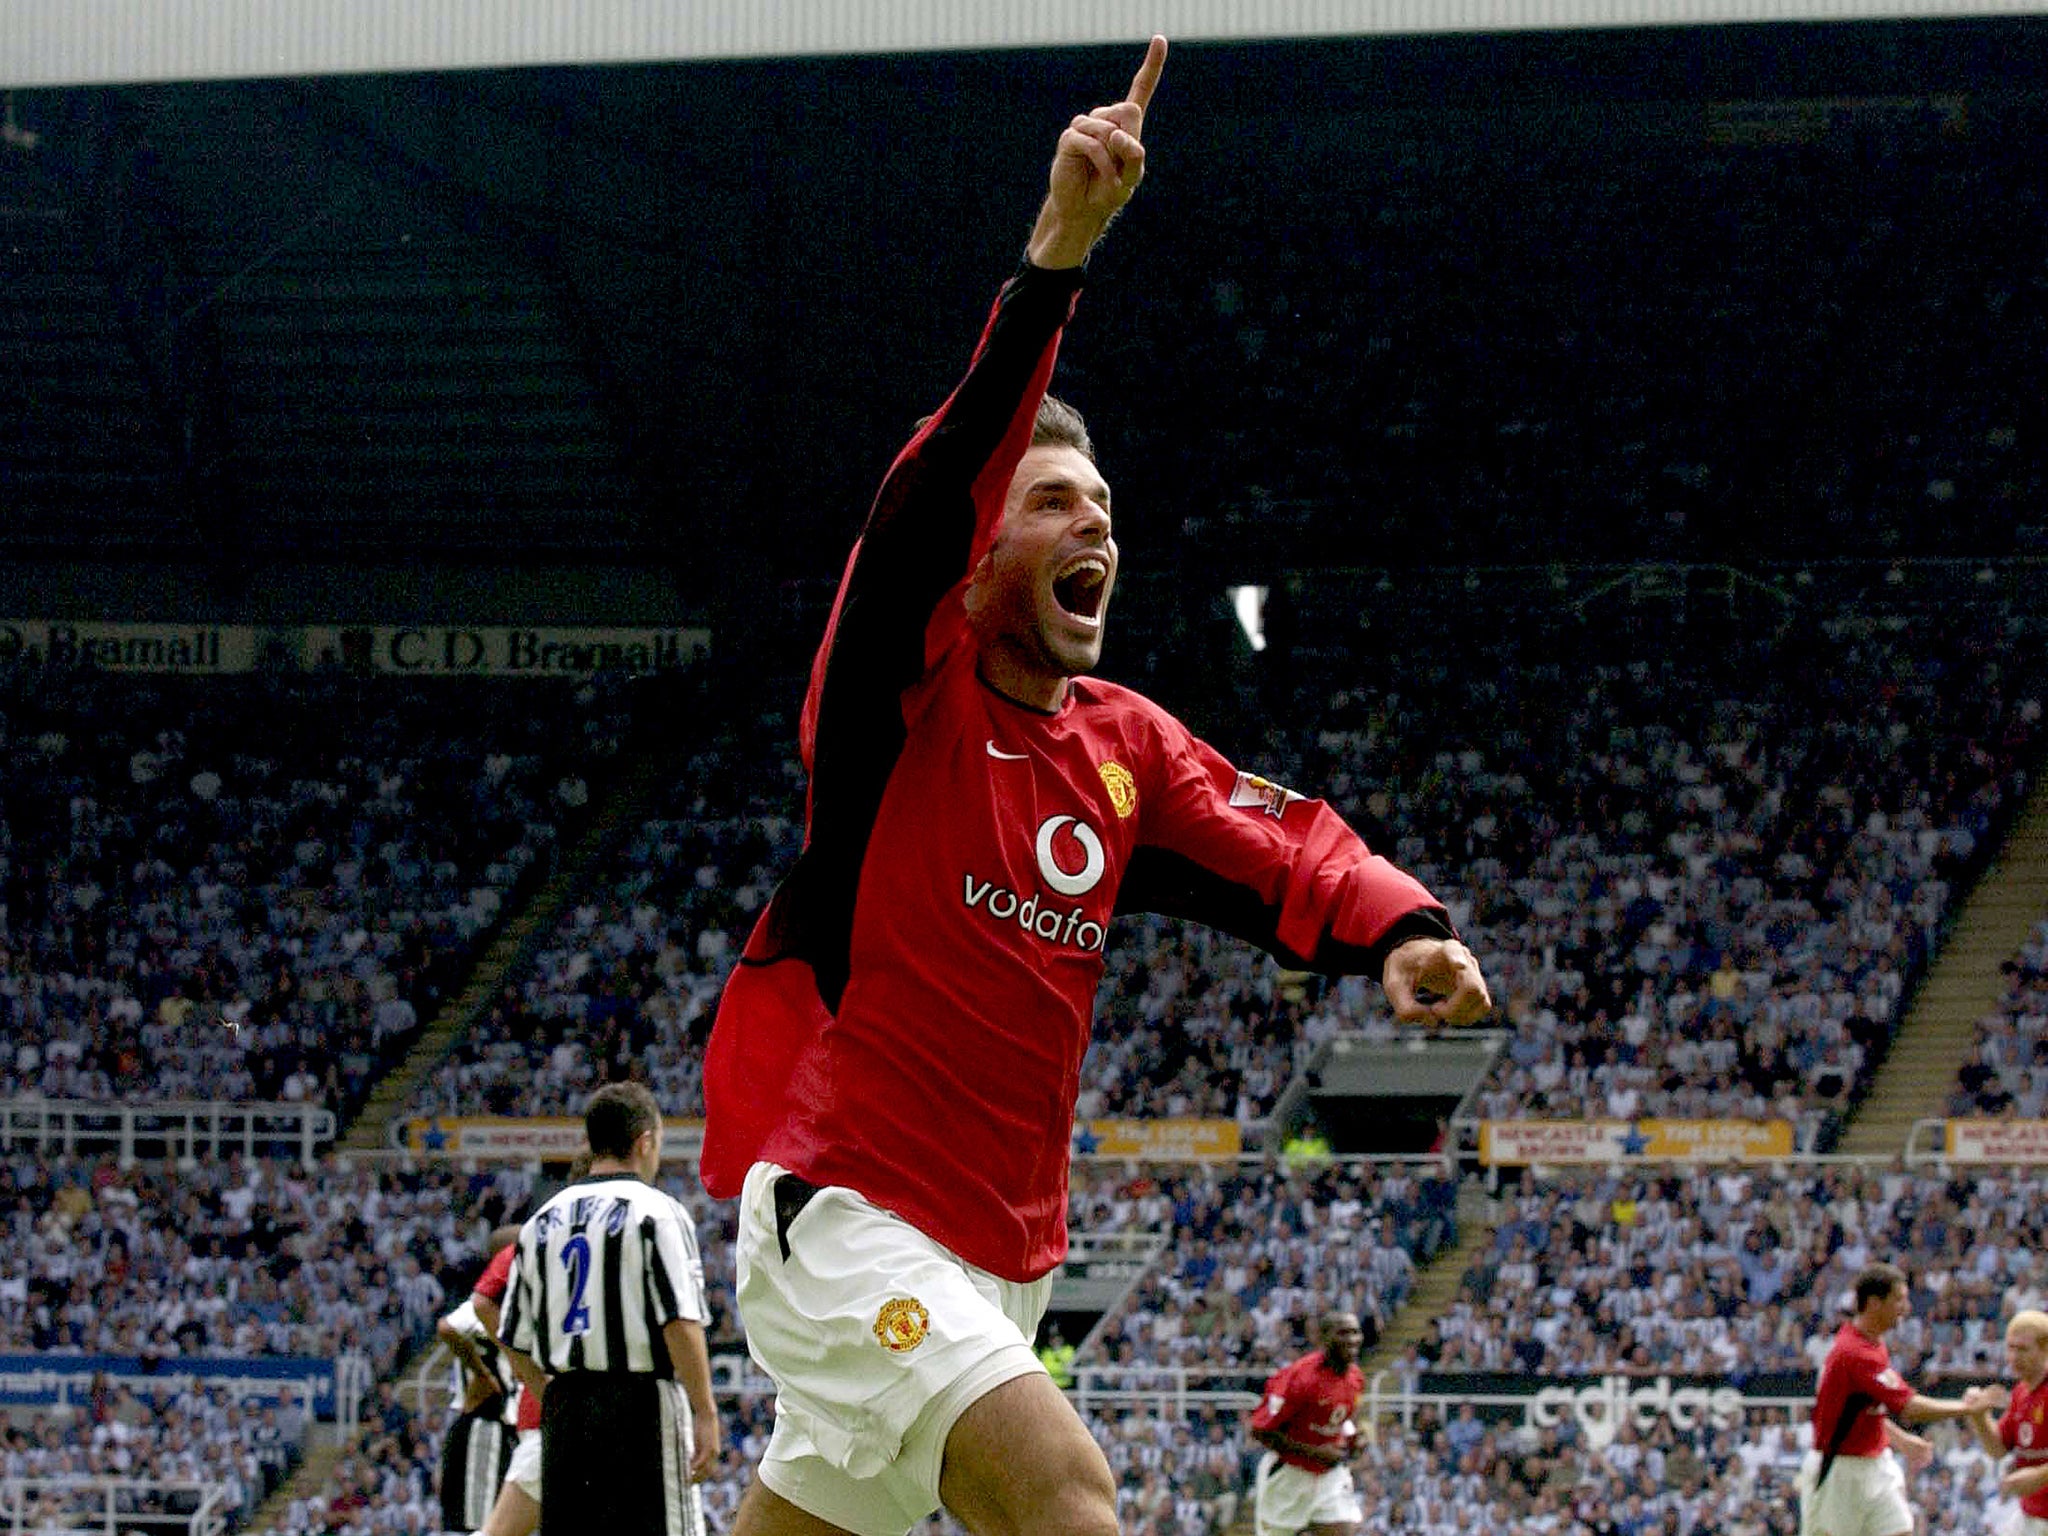 Ruud van Nistelrooy posted the current record of scoring in 10 consecutive games against Newcastle United in 2003